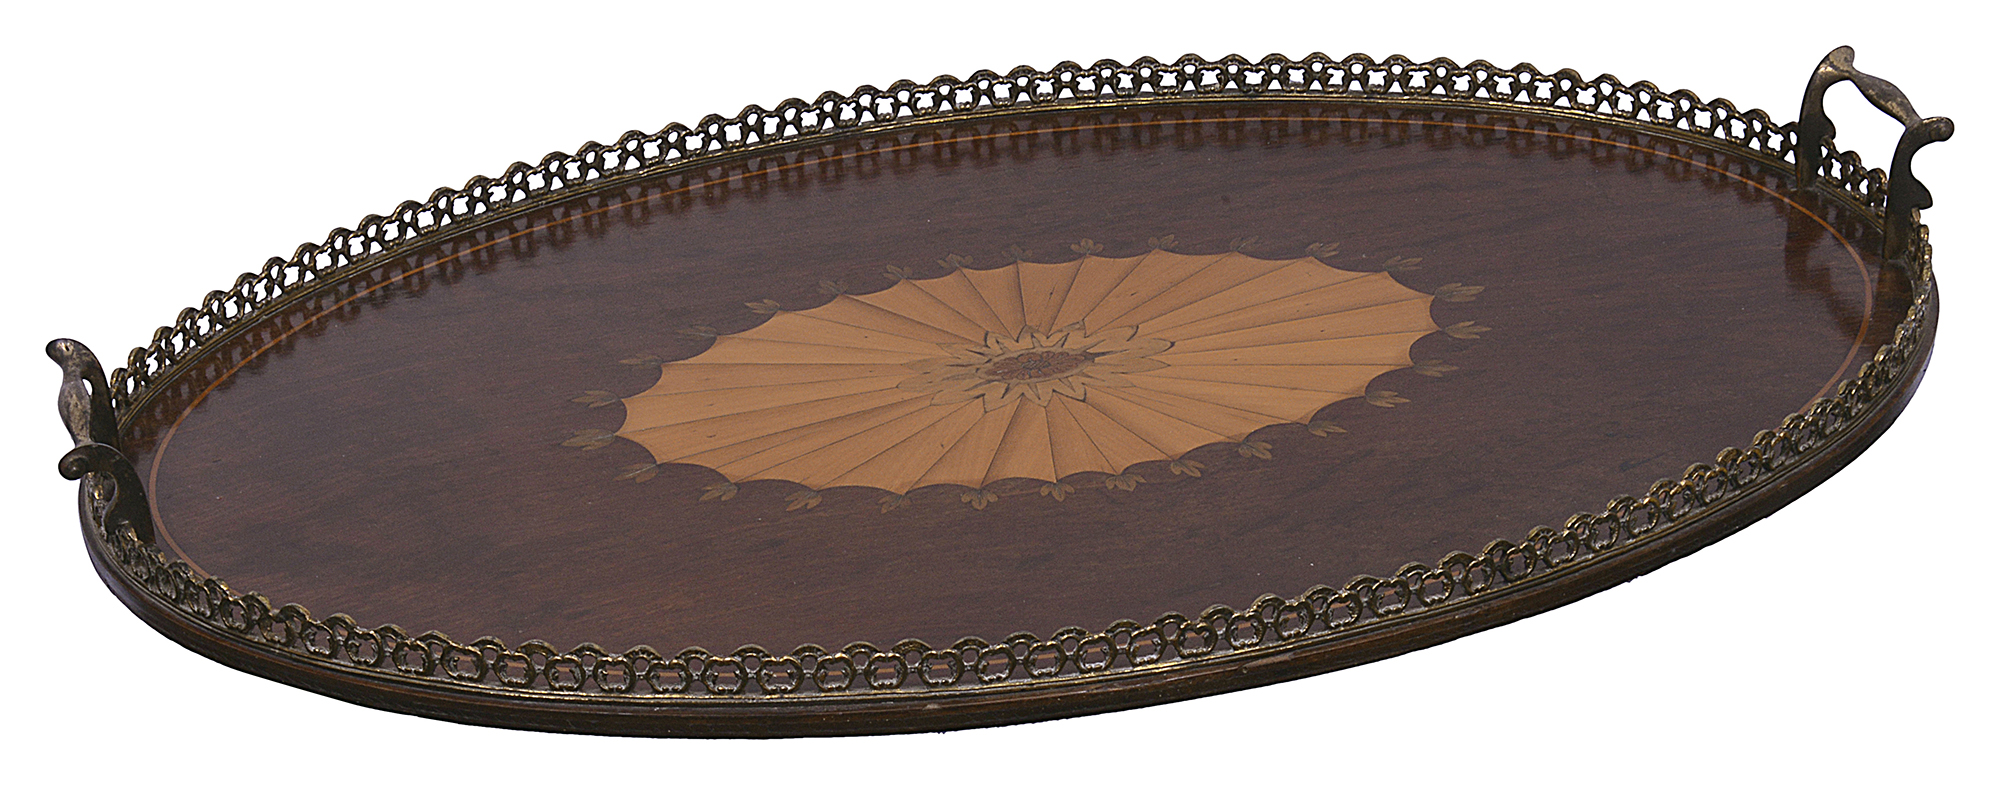 A late 19th century plum pudding mahogany and marquetry inlaid oval tray* - Image 2 of 6